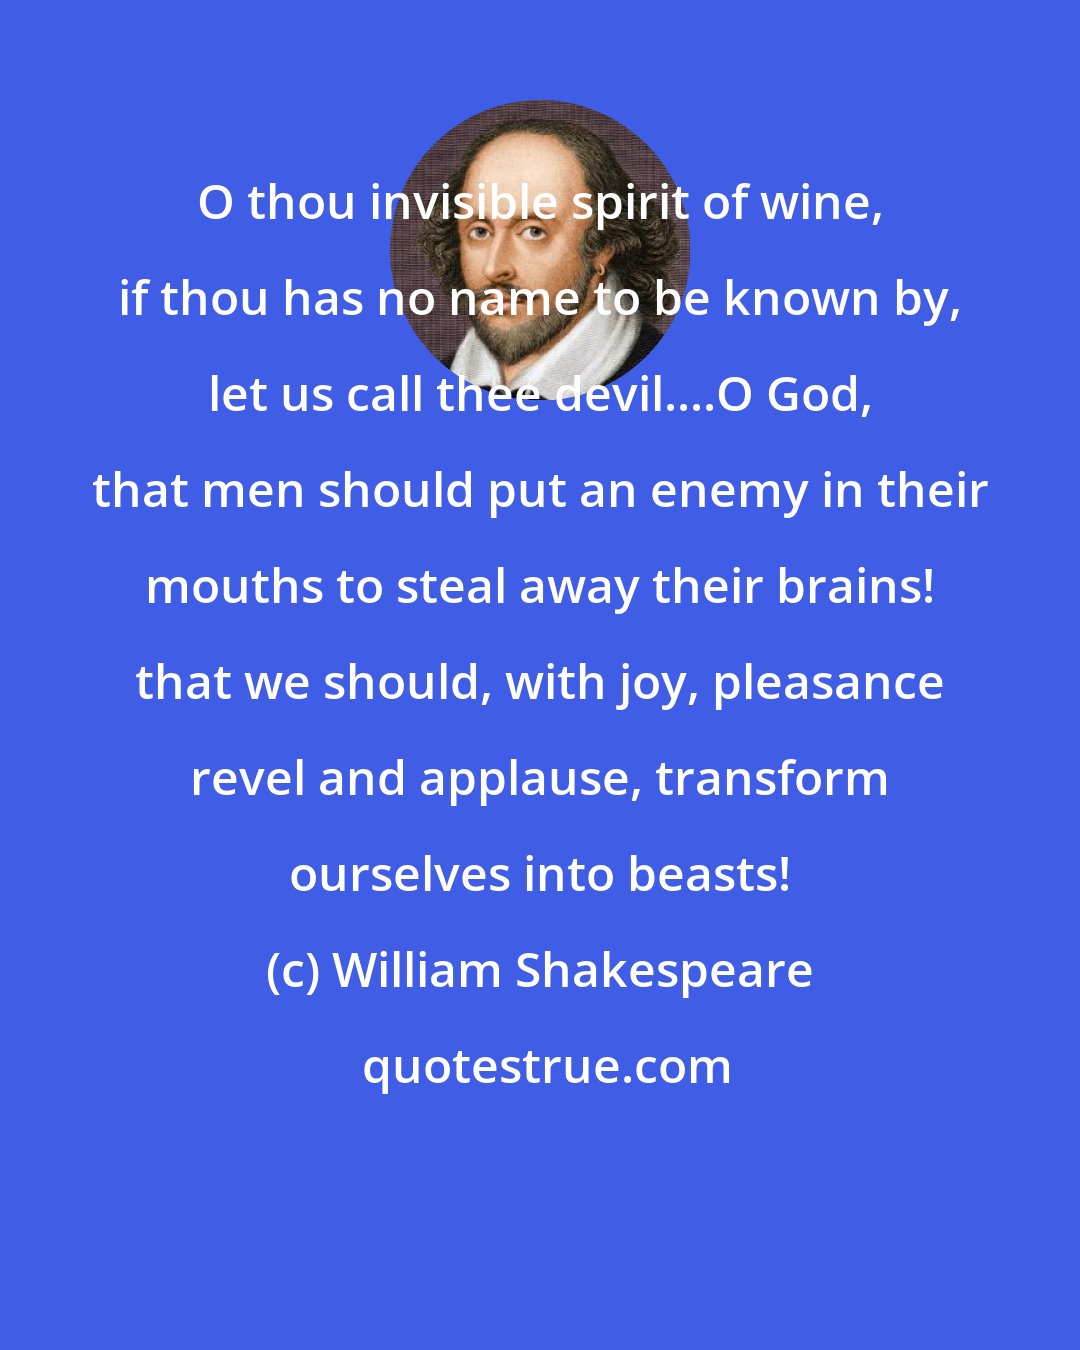 William Shakespeare: O thou invisible spirit of wine, if thou has no name to be known by, let us call thee devil....O God, that men should put an enemy in their mouths to steal away their brains! that we should, with joy, pleasance revel and applause, transform ourselves into beasts!